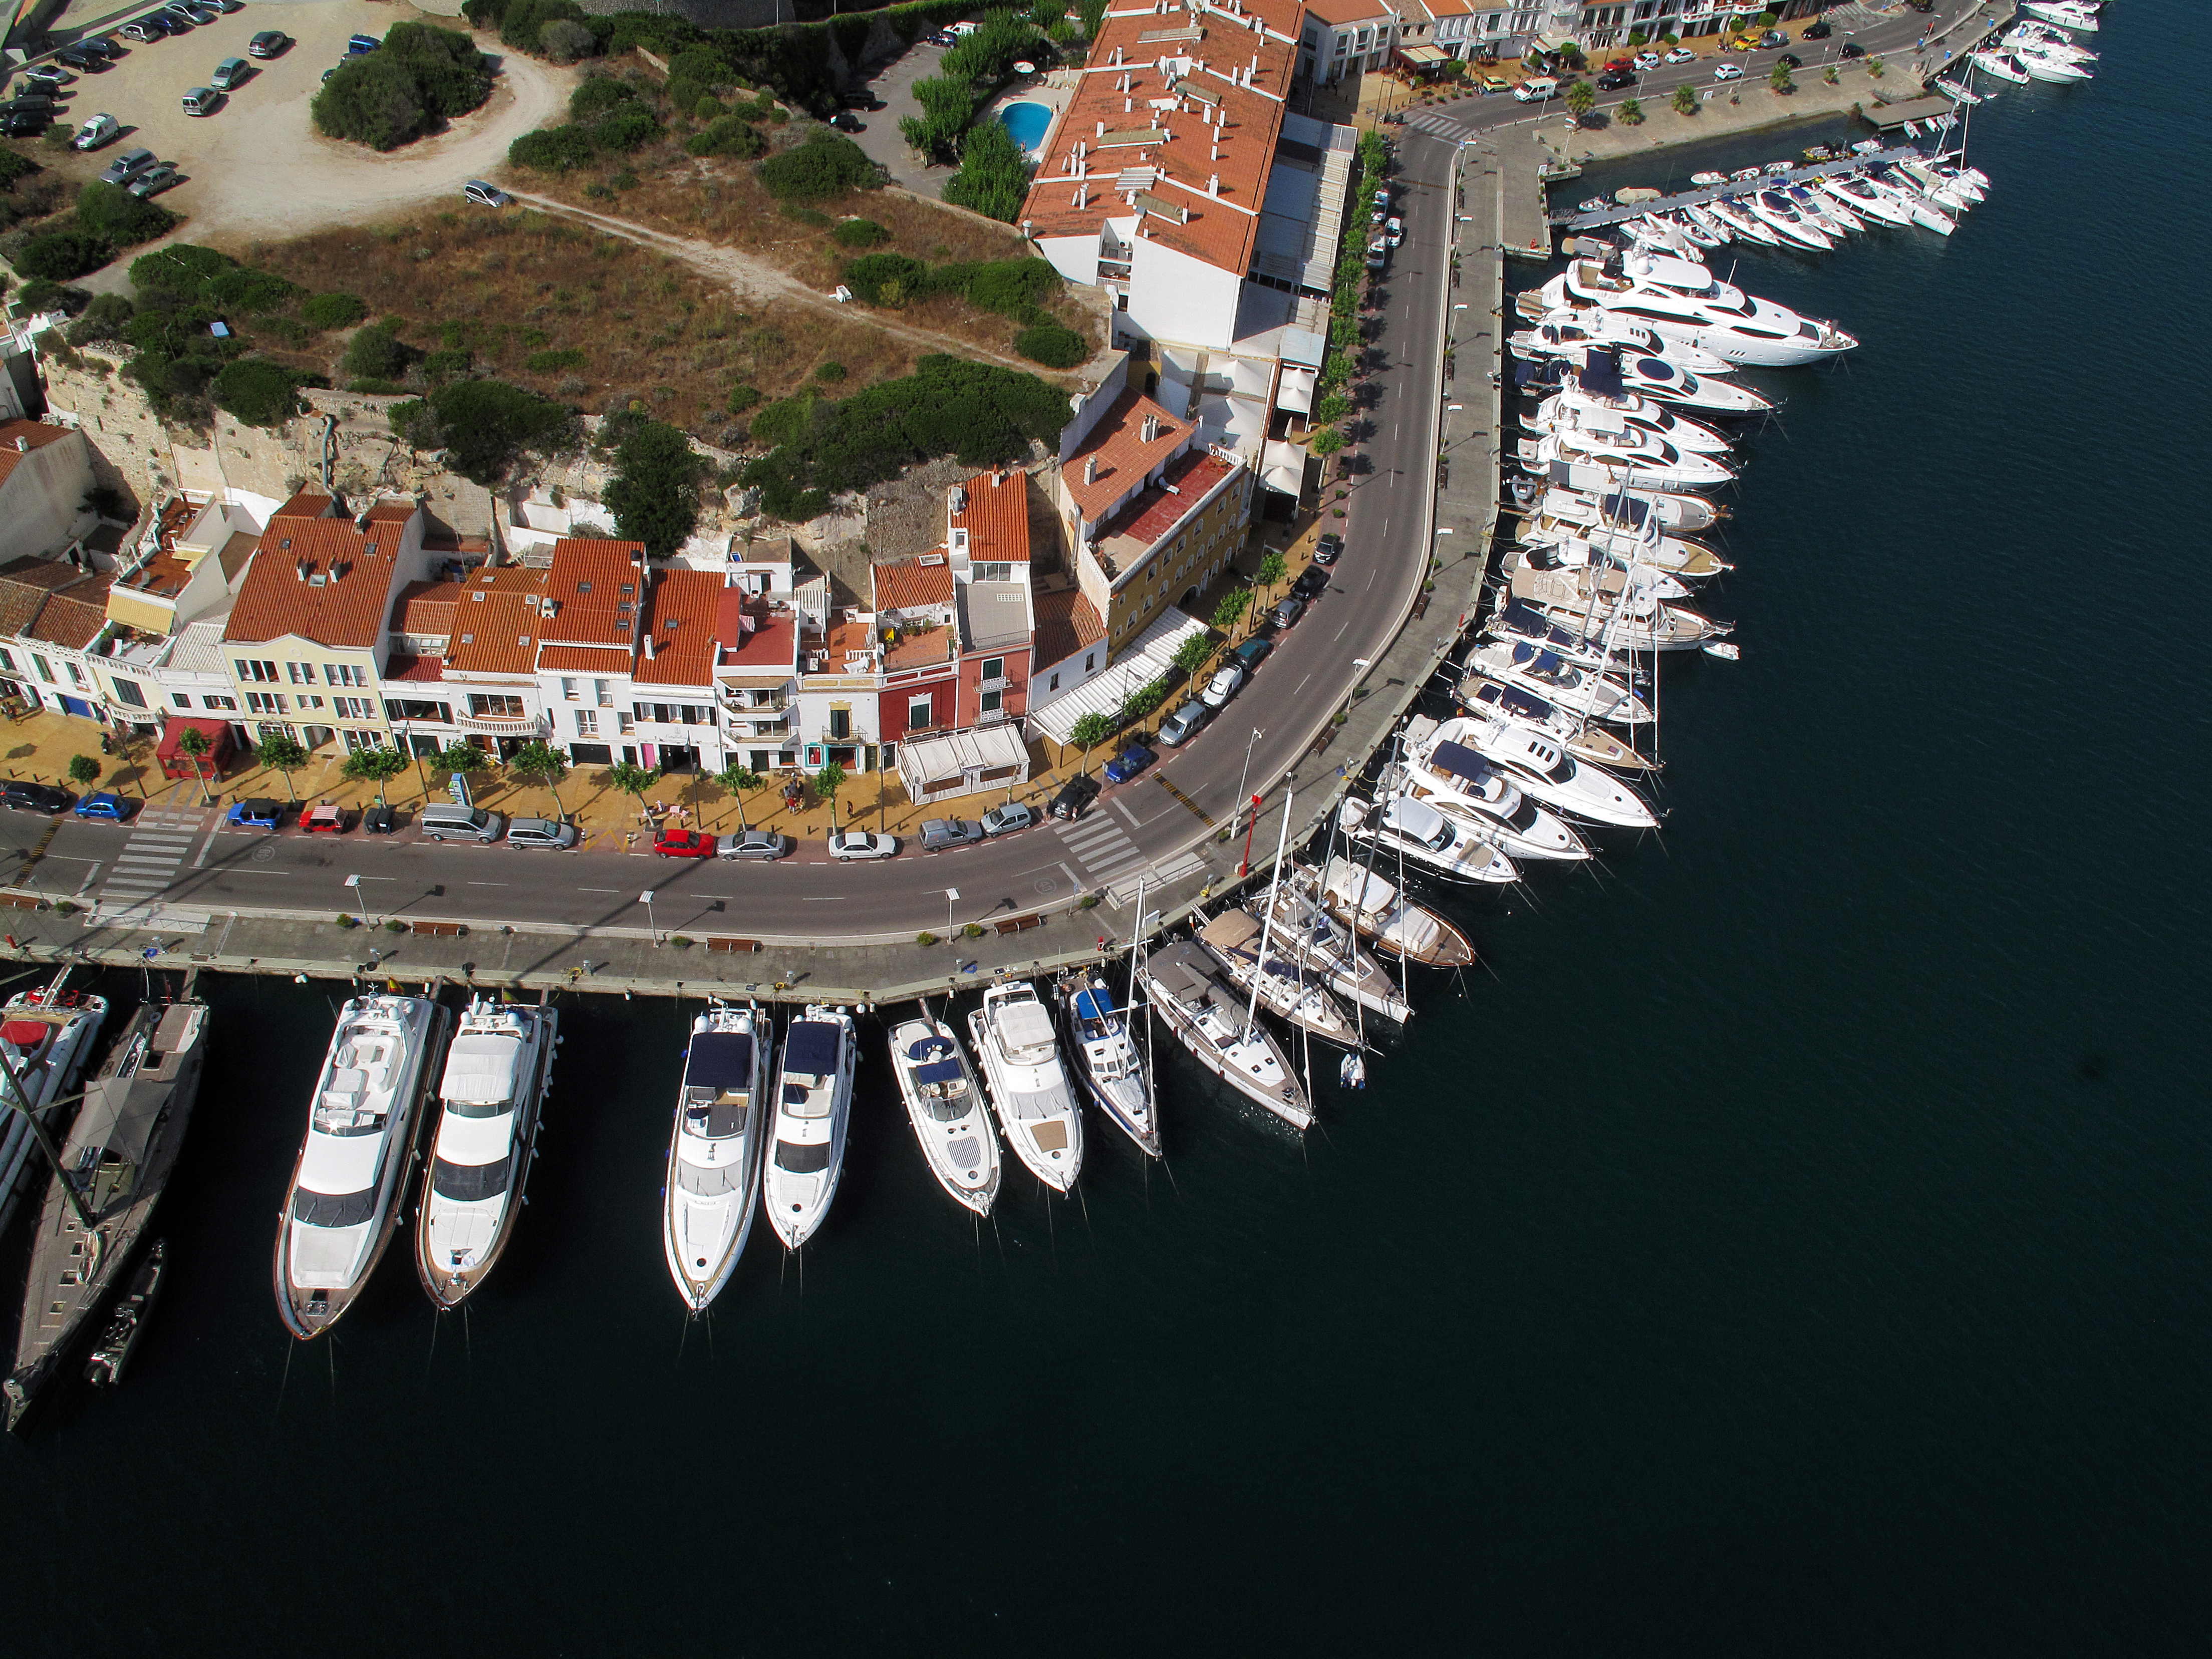 The APB has put out to tender the management of mooring points in the d’en Reynés boatyard at the Port of Mahon